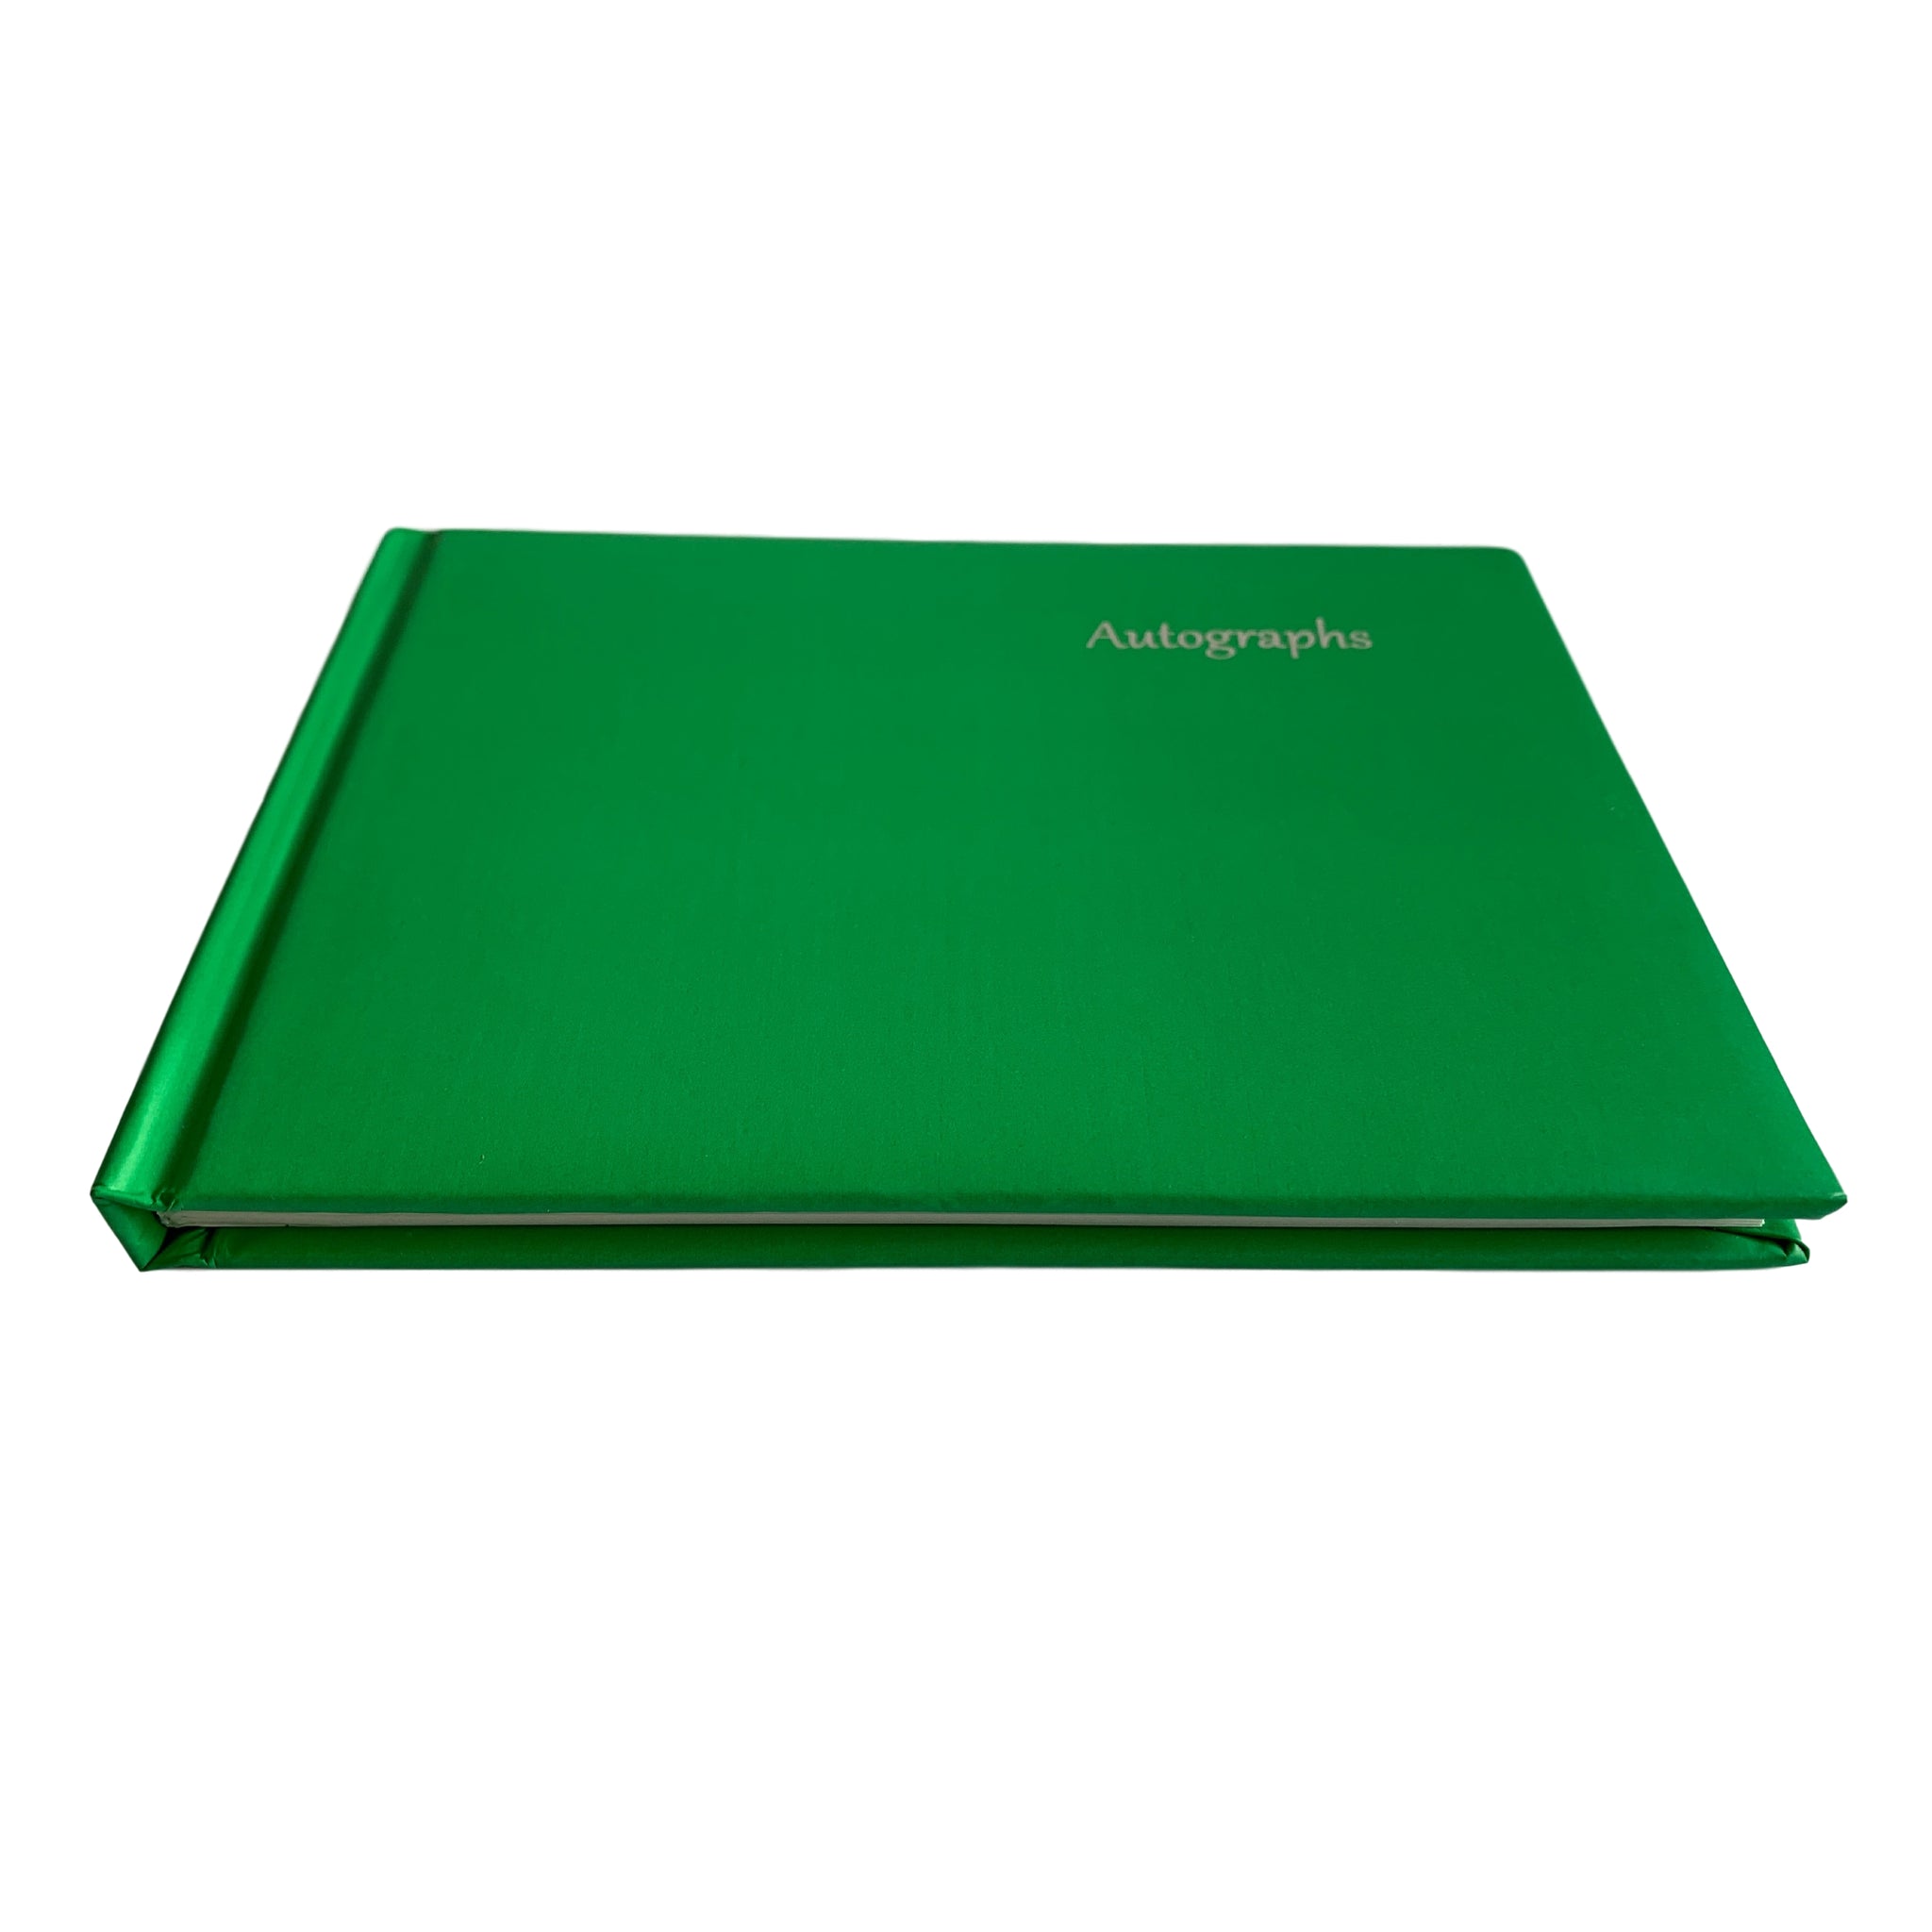 Green Autograph Book by Janrax - Signature End of Term School Leavers